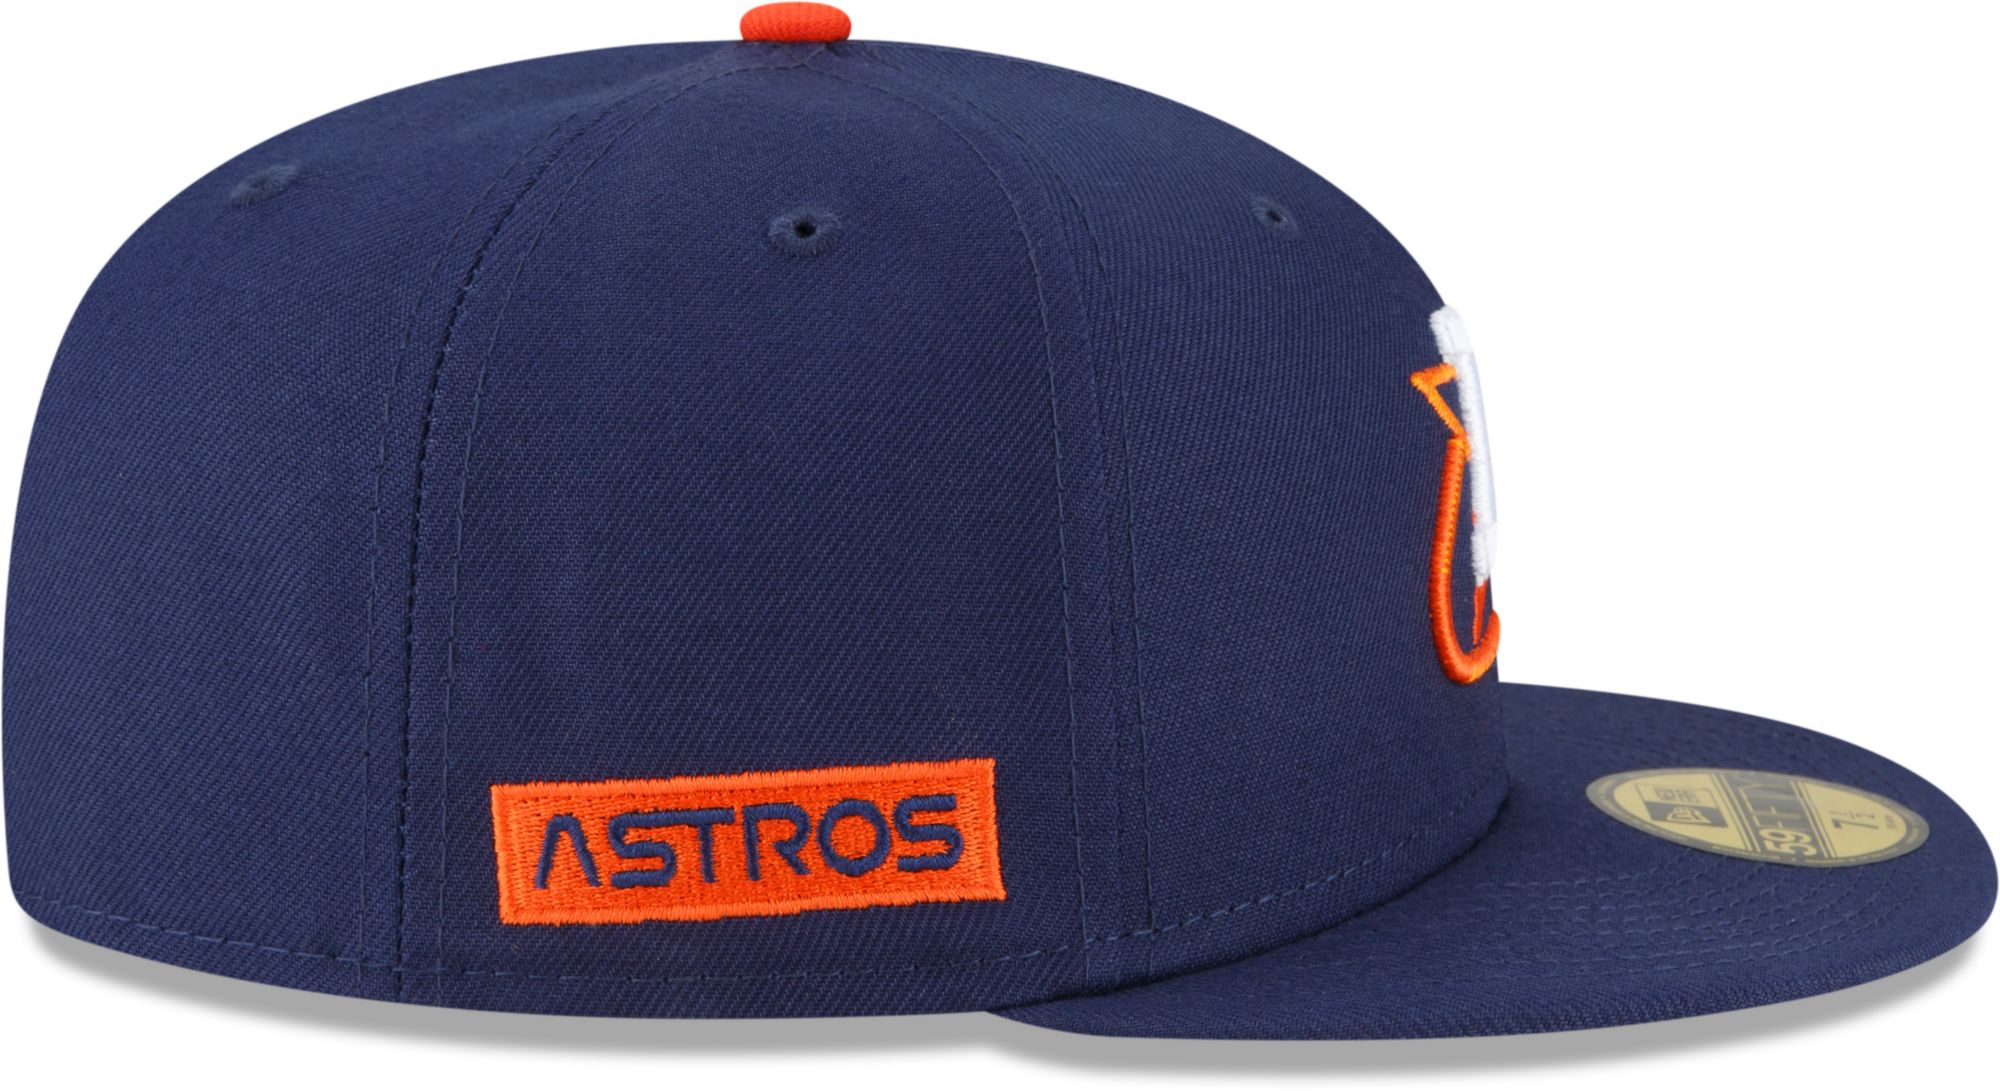 Officially Licensed MLB Men's Astros 2022 Fitted Hat